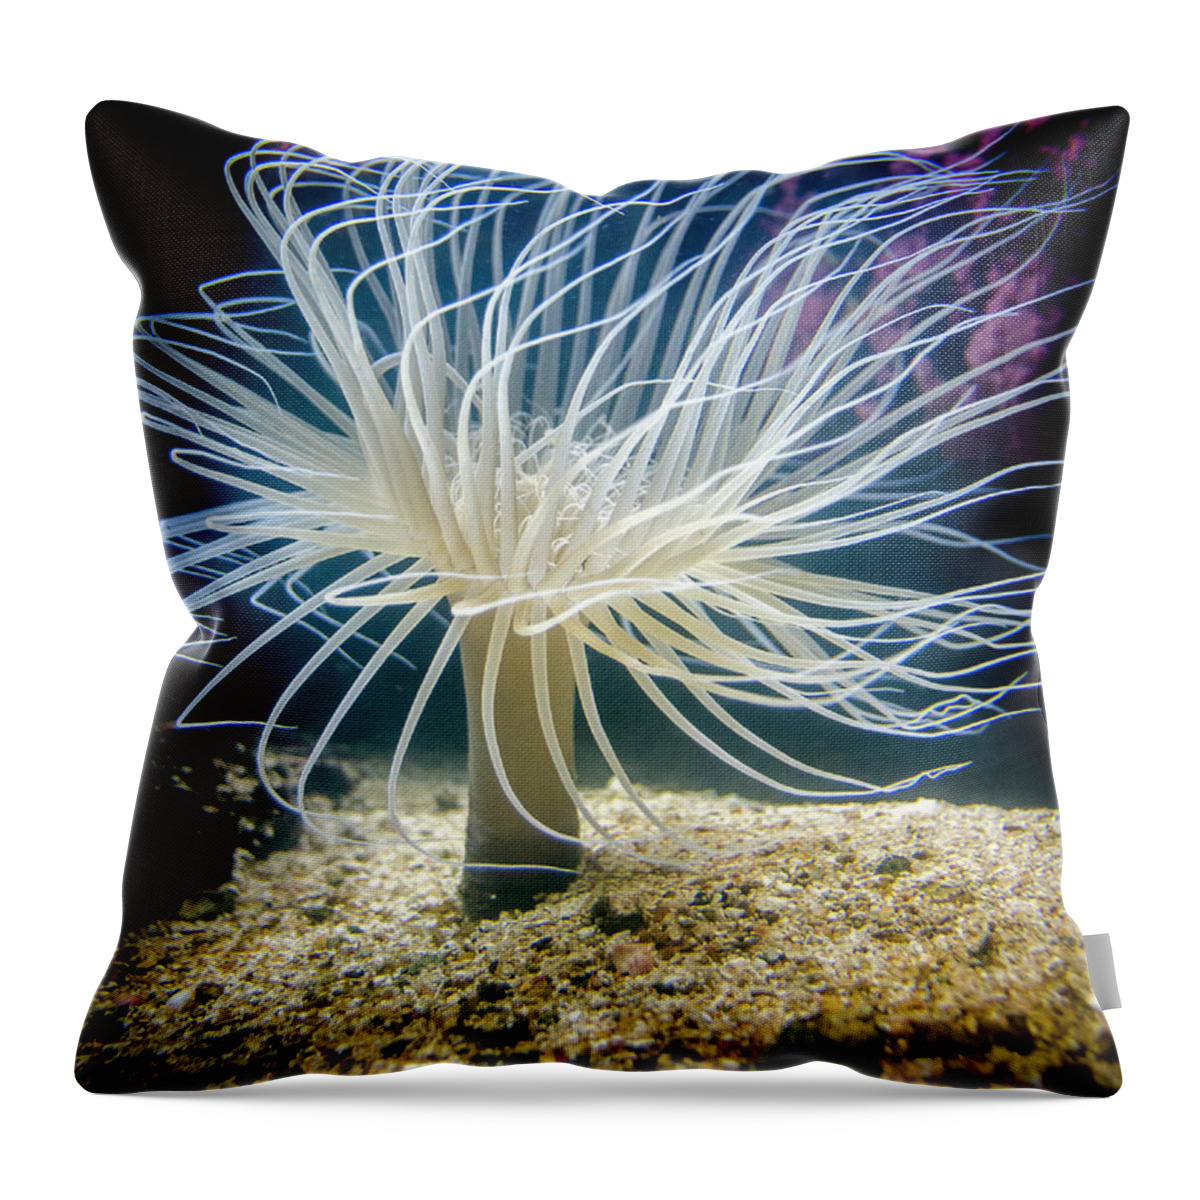 Tube Anemone Throw Pillow featuring the photograph Tube Anemone by WAZgriffin Digital